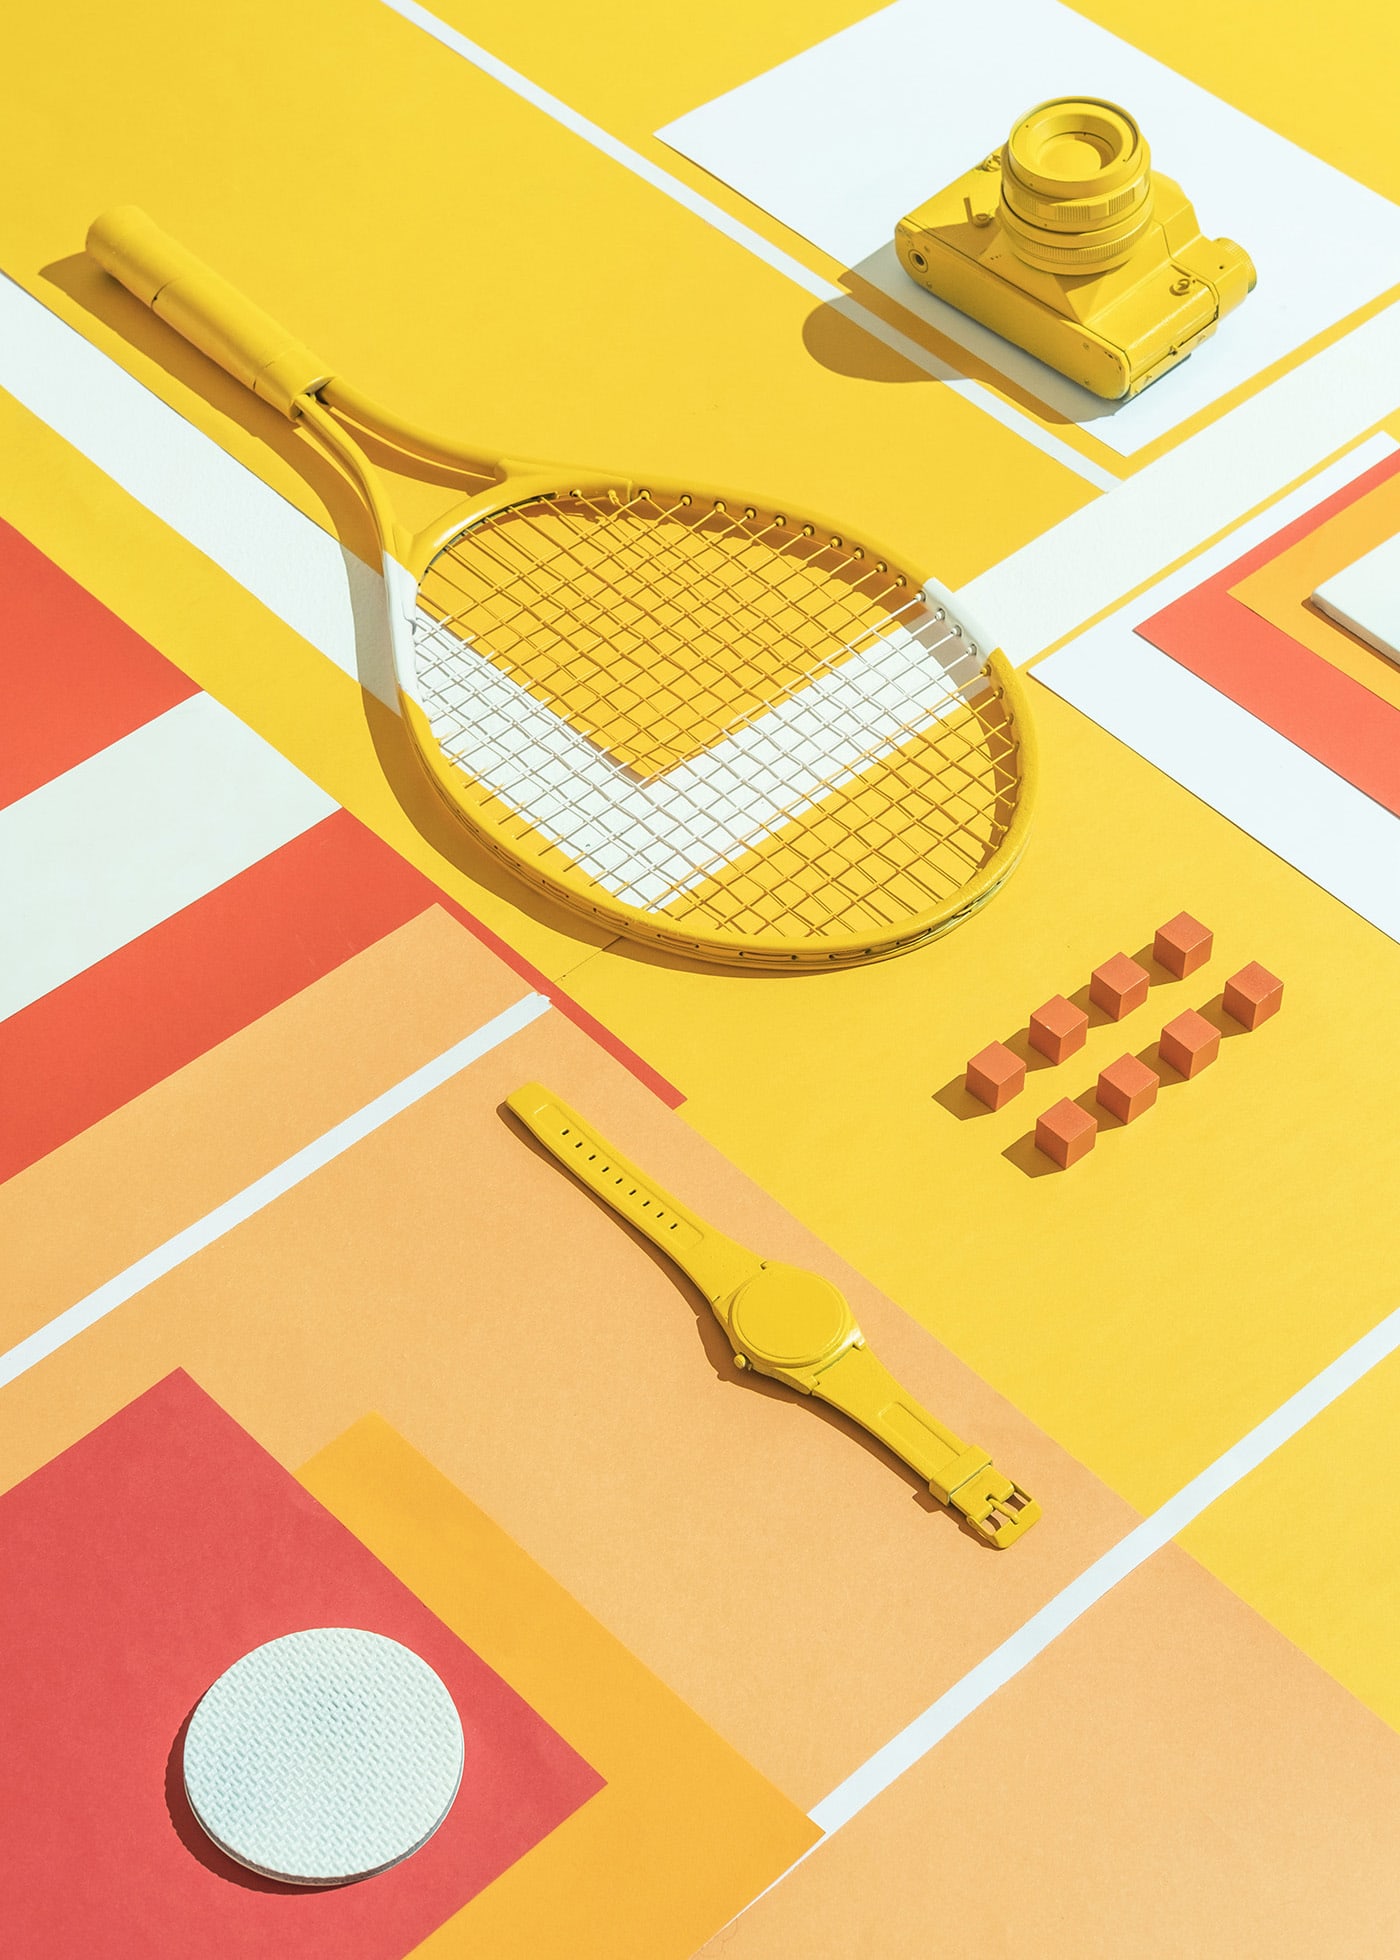 Abstract Tennis Themed Background